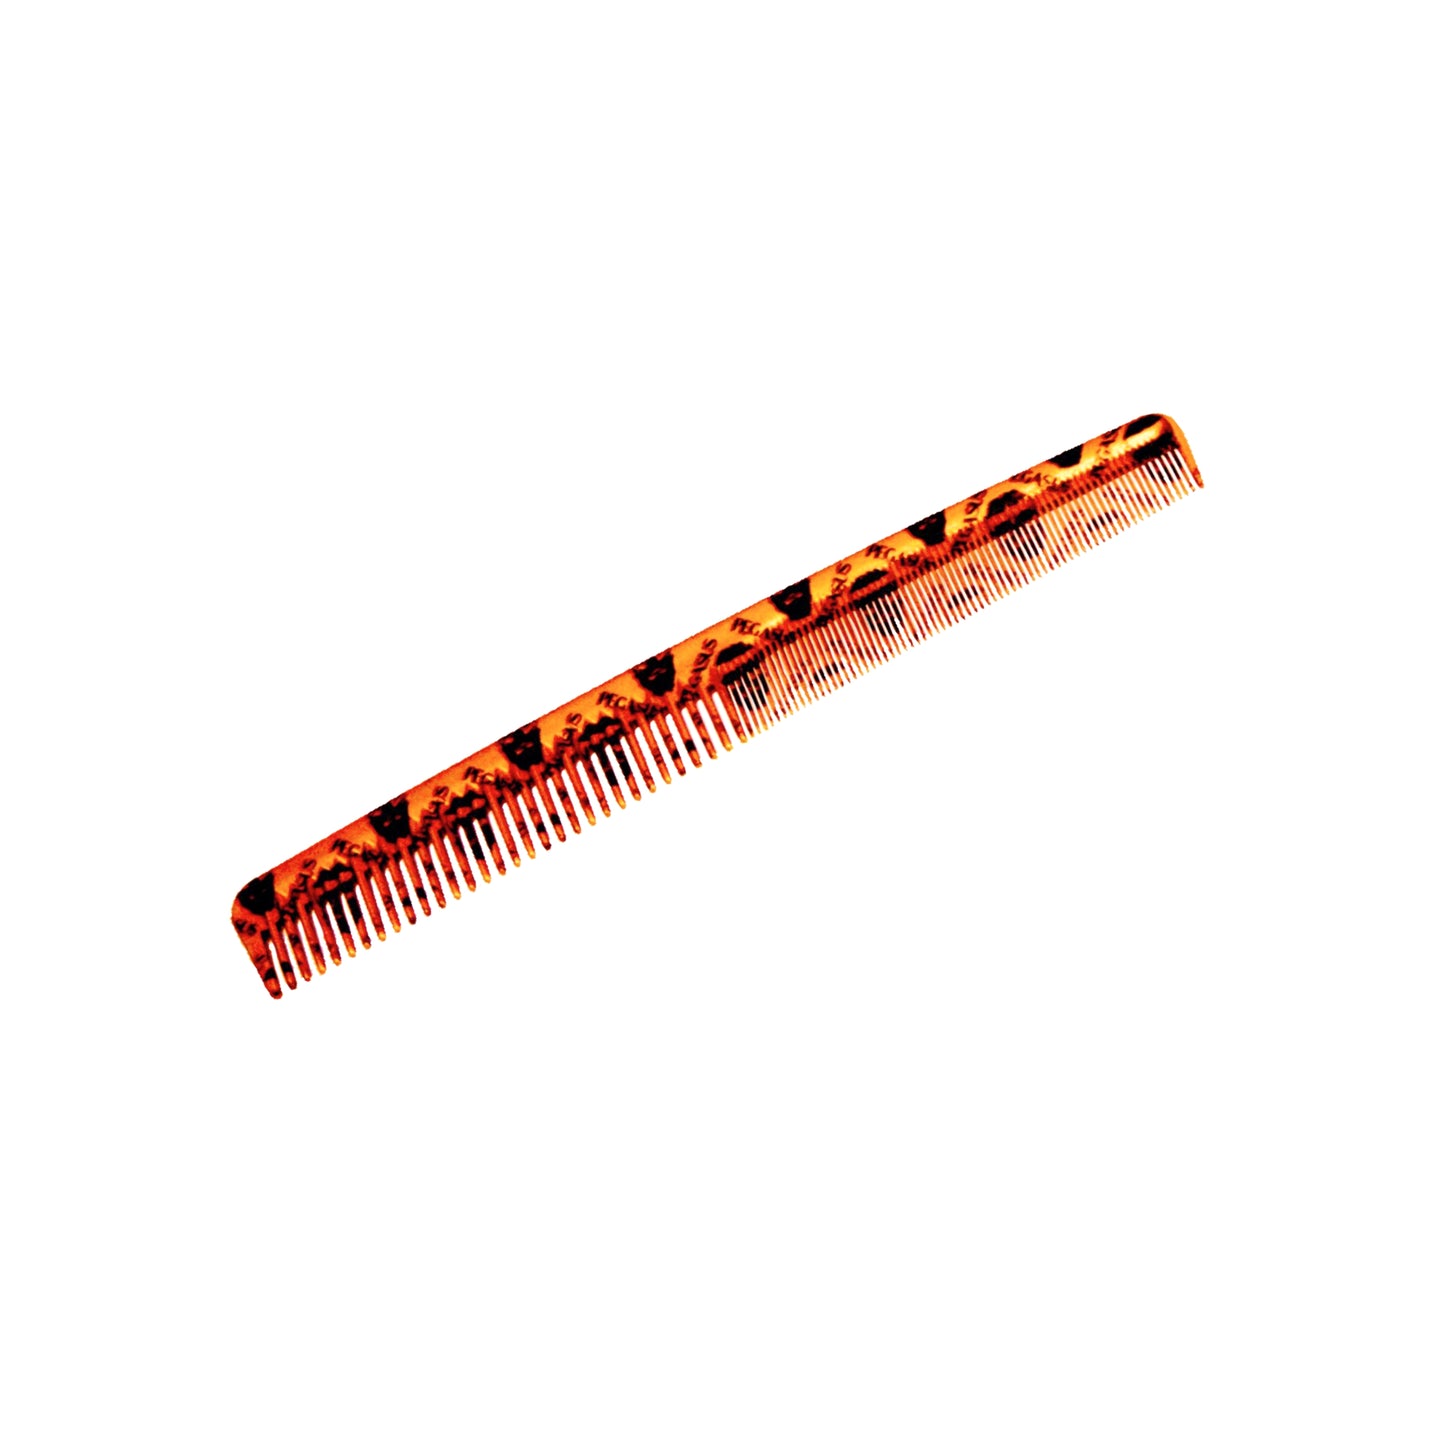 Pegasus Skulleto 201, 7in Hard Rubber Hair Detangling/Trimmer Comb, Handmade, Seamless, Smooth Edges, Anti Static, Heat and Chemically Resistant, Wet Hair, Everyday Grooming Comb | Peines de goma dura - Gold